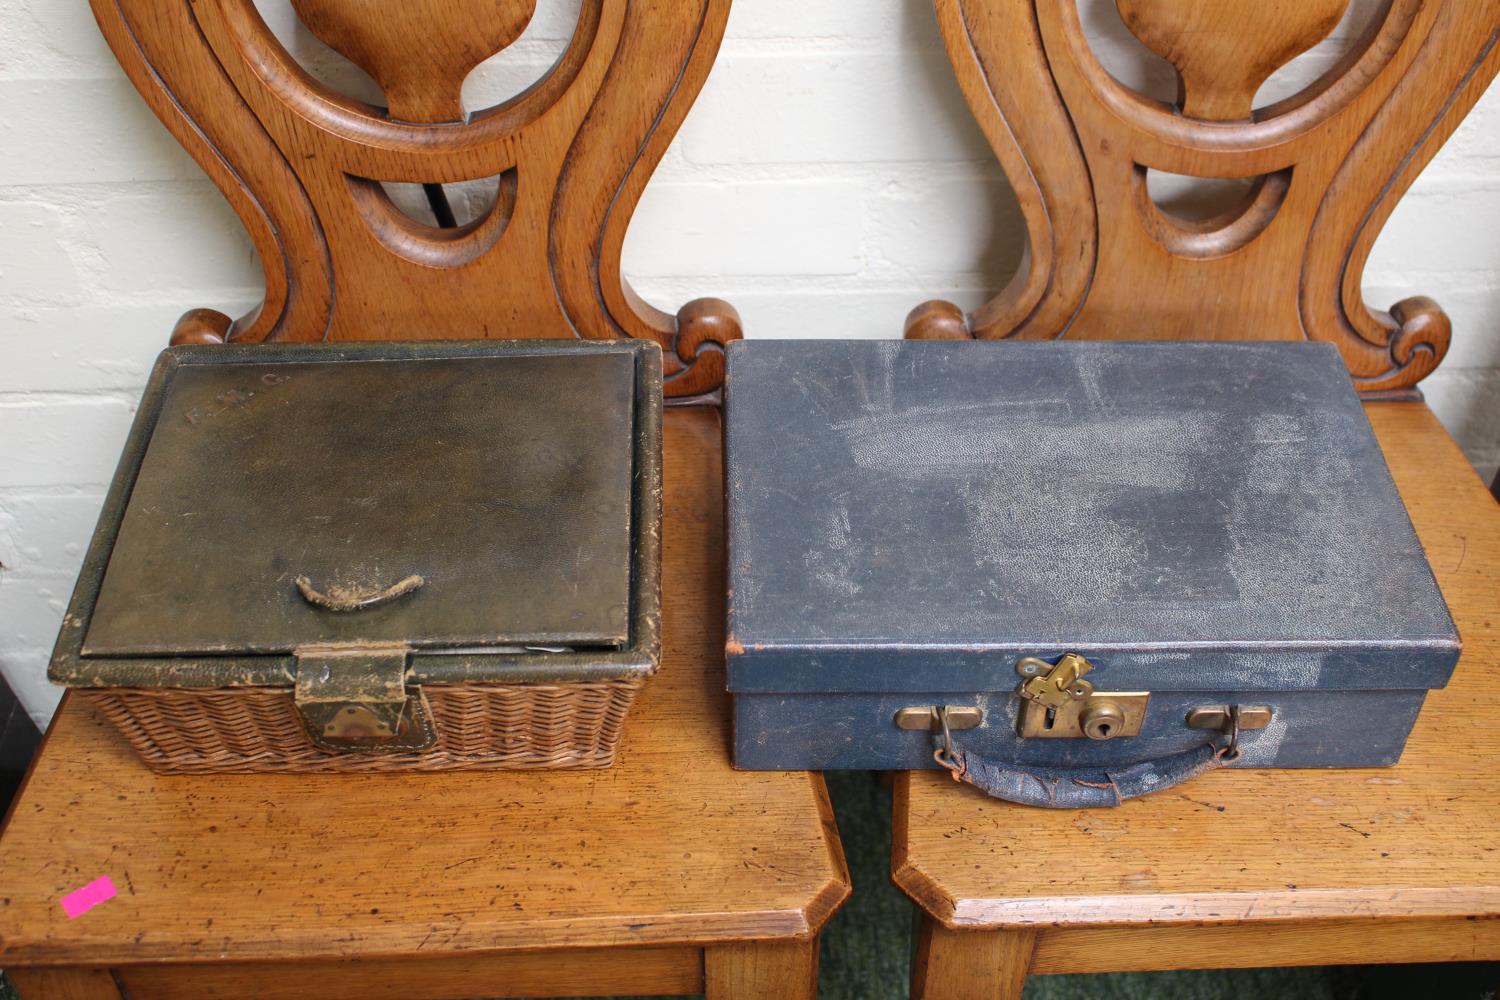 Edwardian Green Leatherette cane sewing basket and a Leatherette sewing case with brass fittings